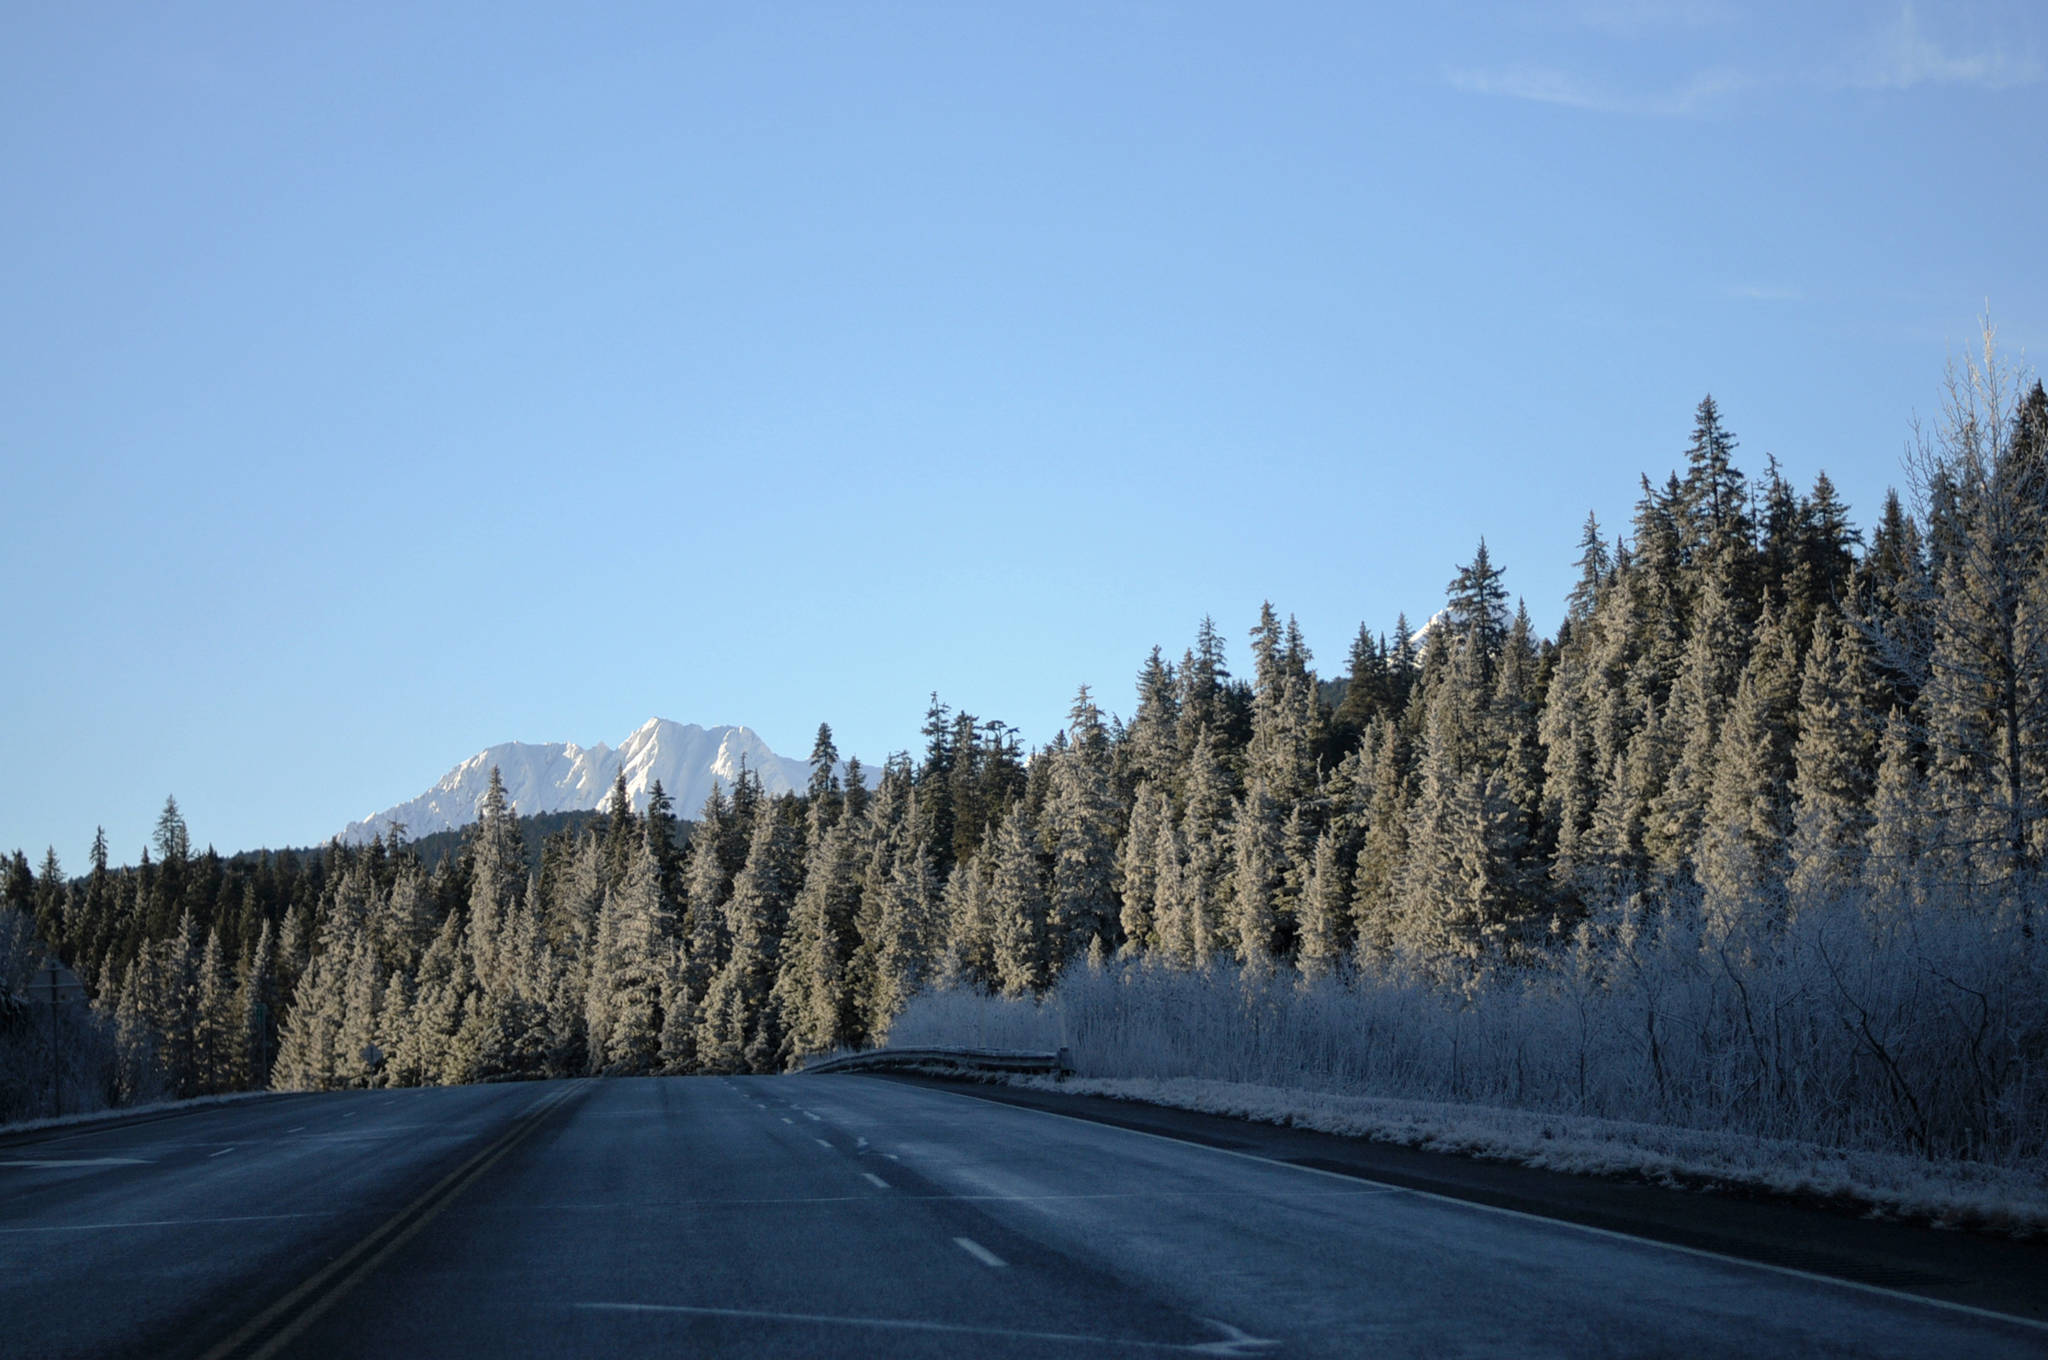 In this November 2016 photo, the Seward Highway stretches southward toward the town of Seward near Moose Pass. The Kenai Peninsula Borough administration is working on establishing an emergency medical service area corridor along the highway system on the eastern Kenai Peninsula to provide more thorough emergency response coverage for the thousands of travelers that cross the highway every year. (Elizabeth Earl/Peninsula Clarion, file)